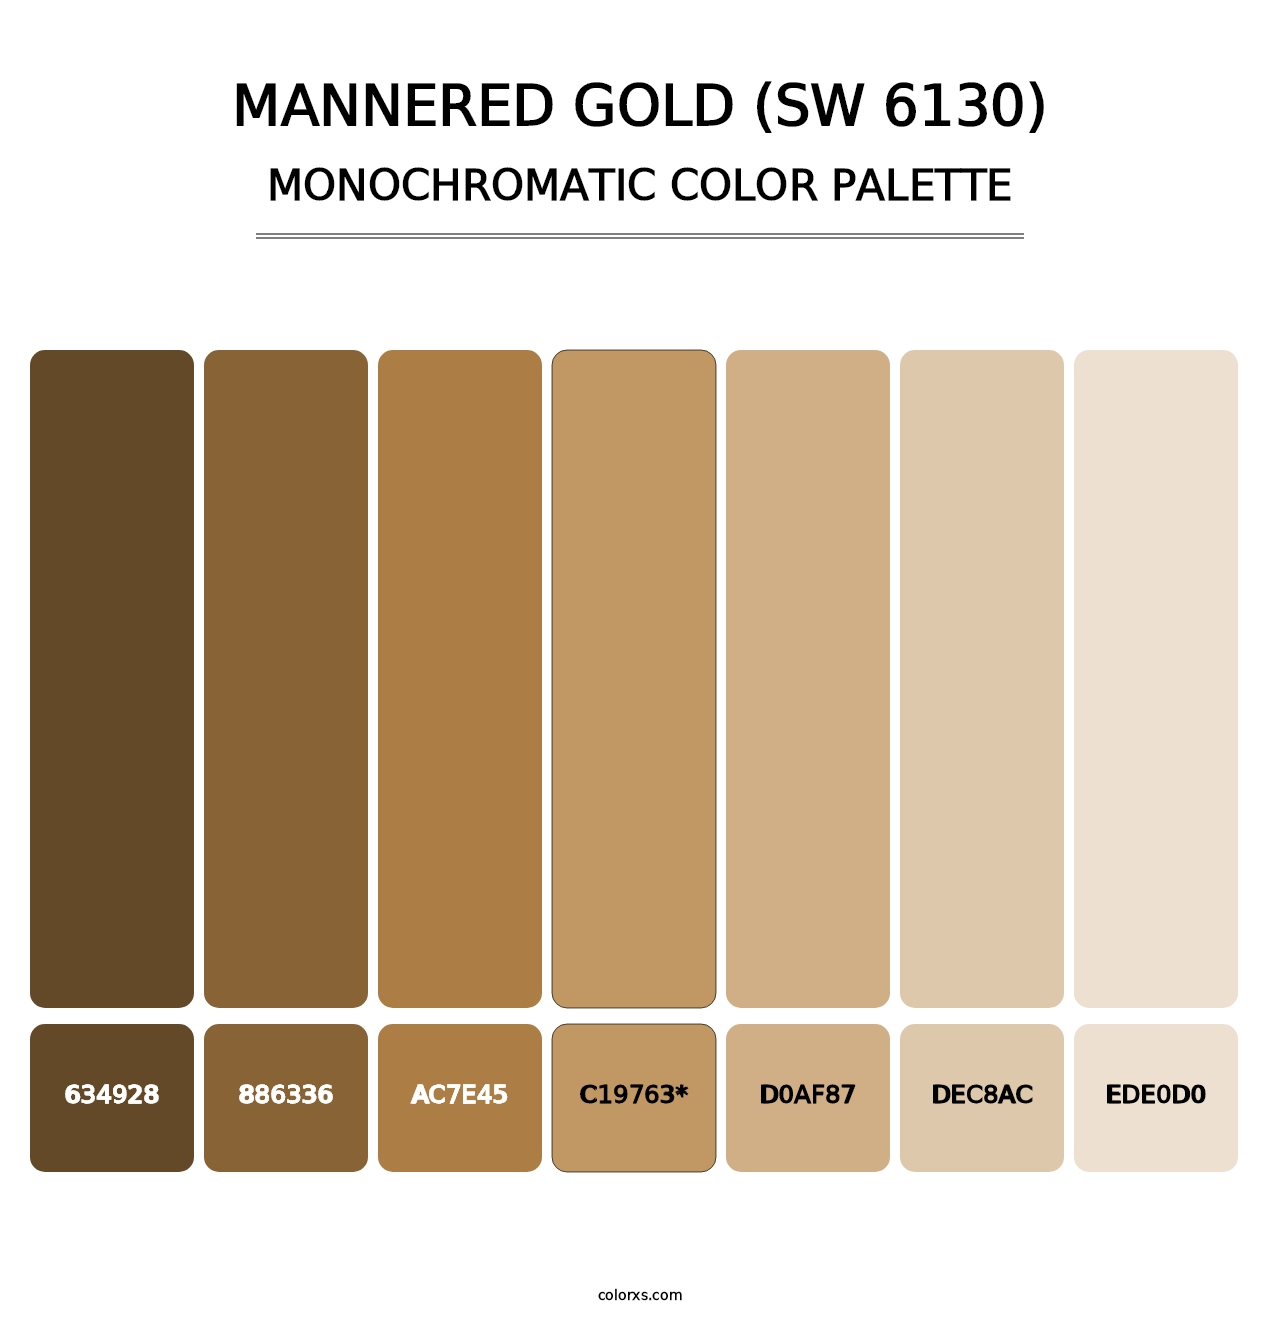 Mannered Gold (SW 6130) - Monochromatic Color Palette